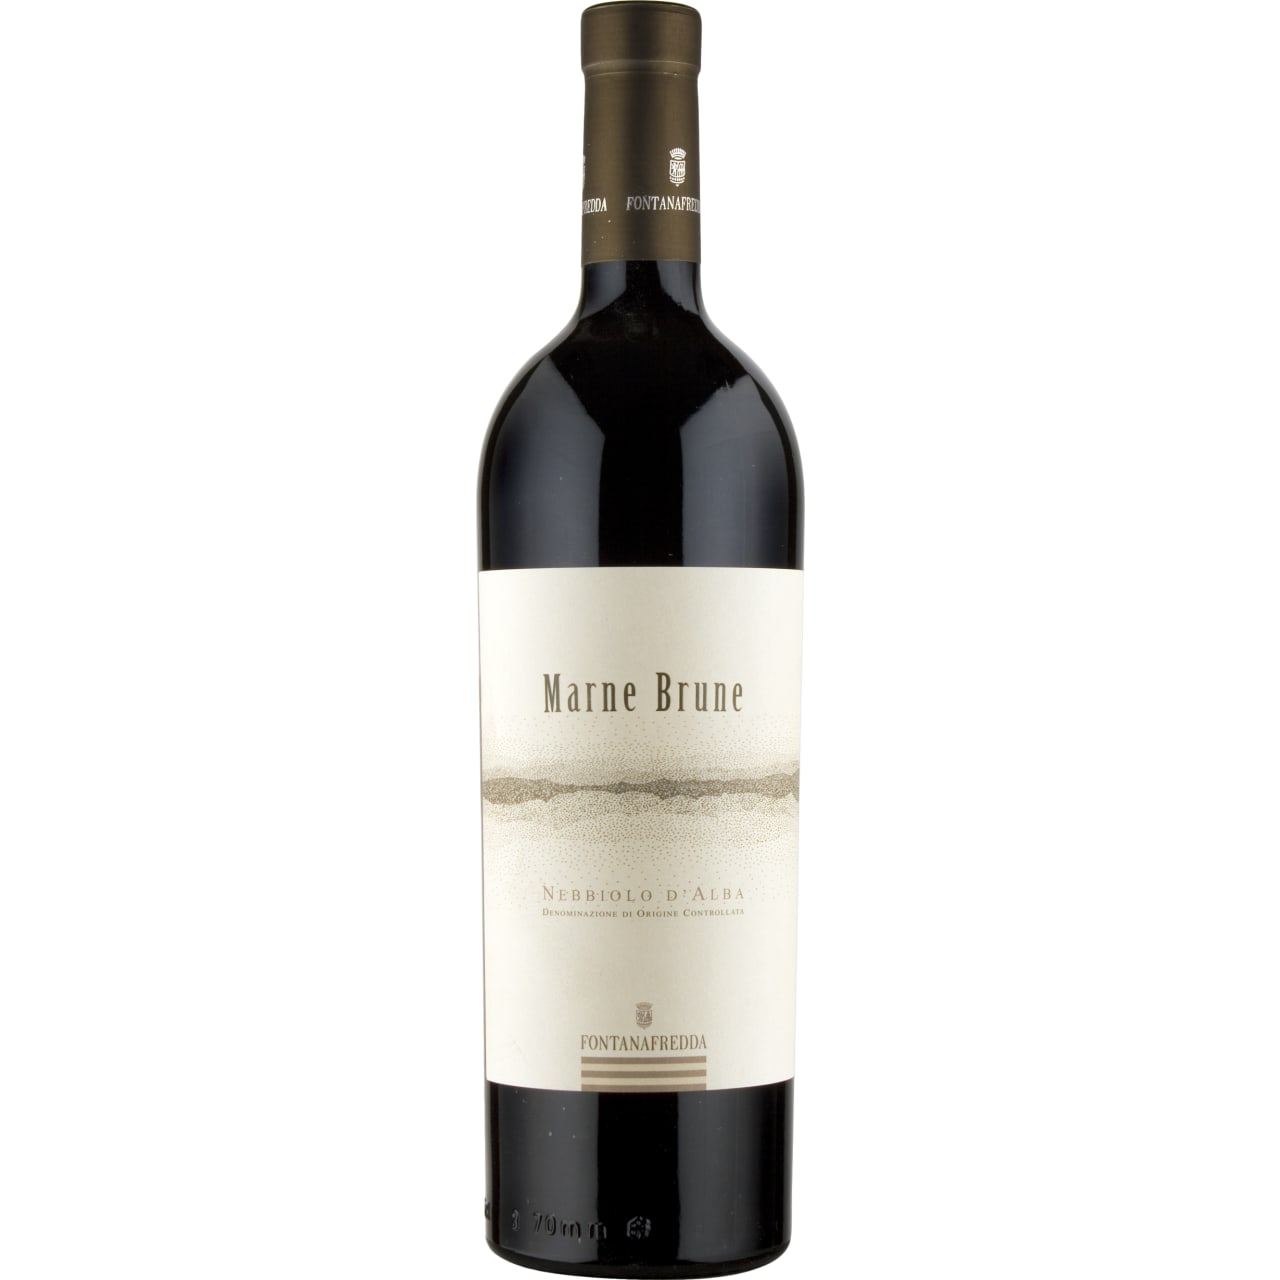 With a floral bouquet and hints of wild fruit, this wine has a strong personality.